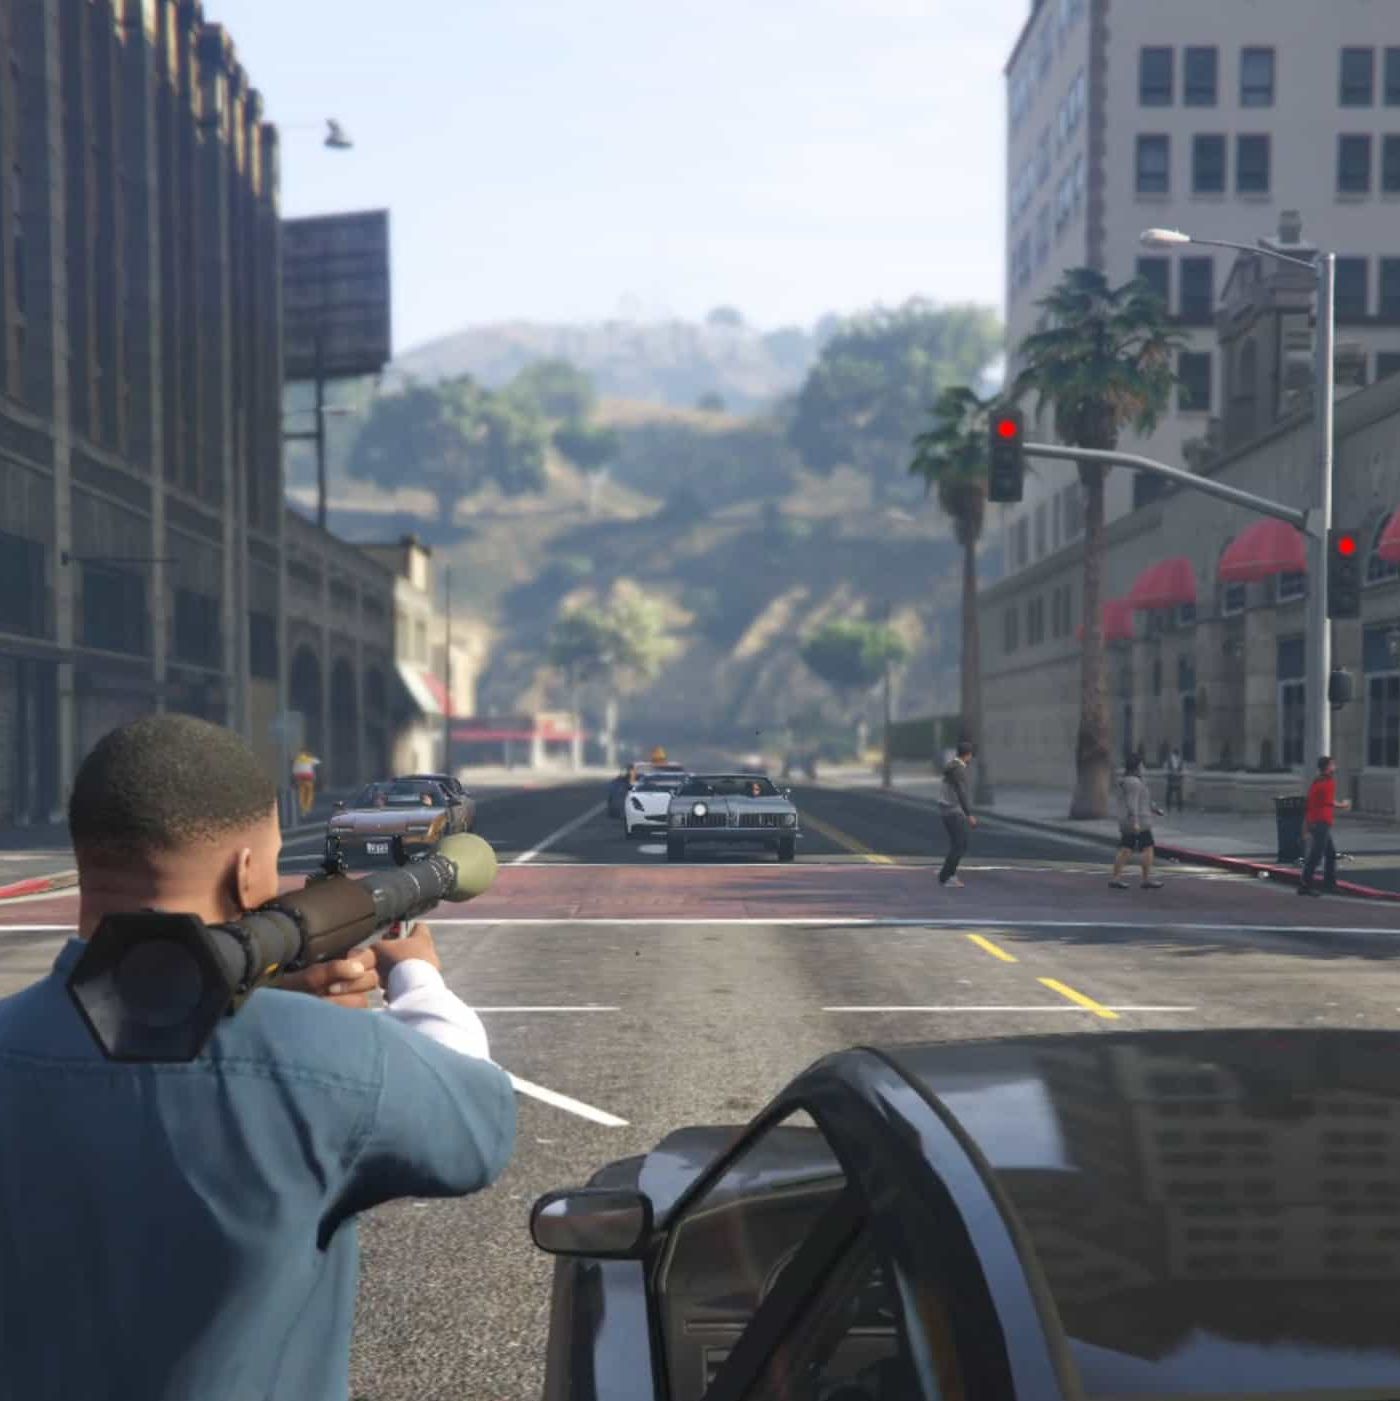 Here's a screenshot of GTA 6 posted by JackOLantern1982 which was